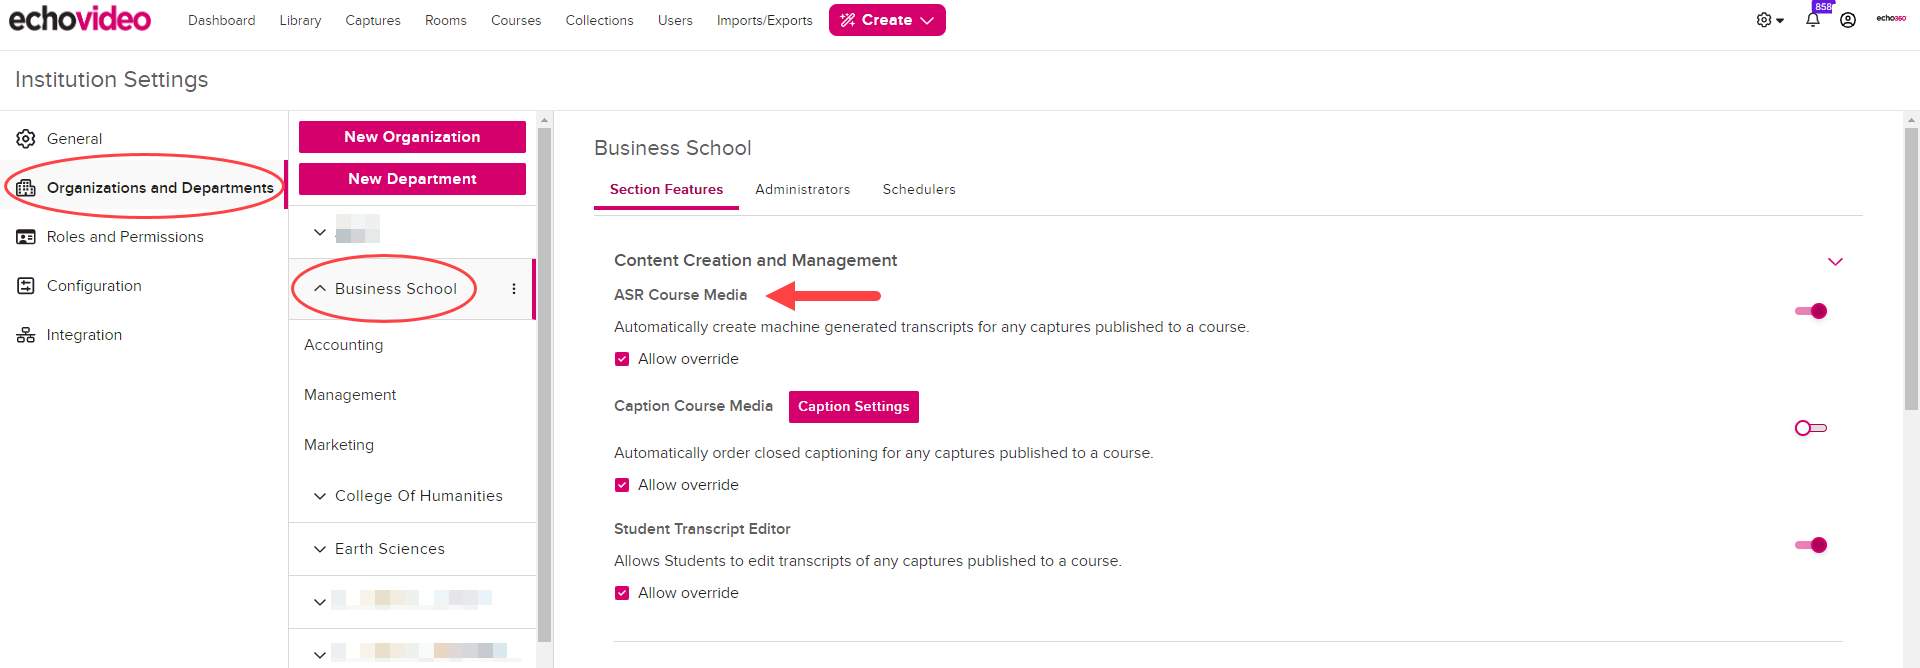 Sections Features tab for a department or organization as seen by a Designated Admin with the Content Creation and Management section shown as described